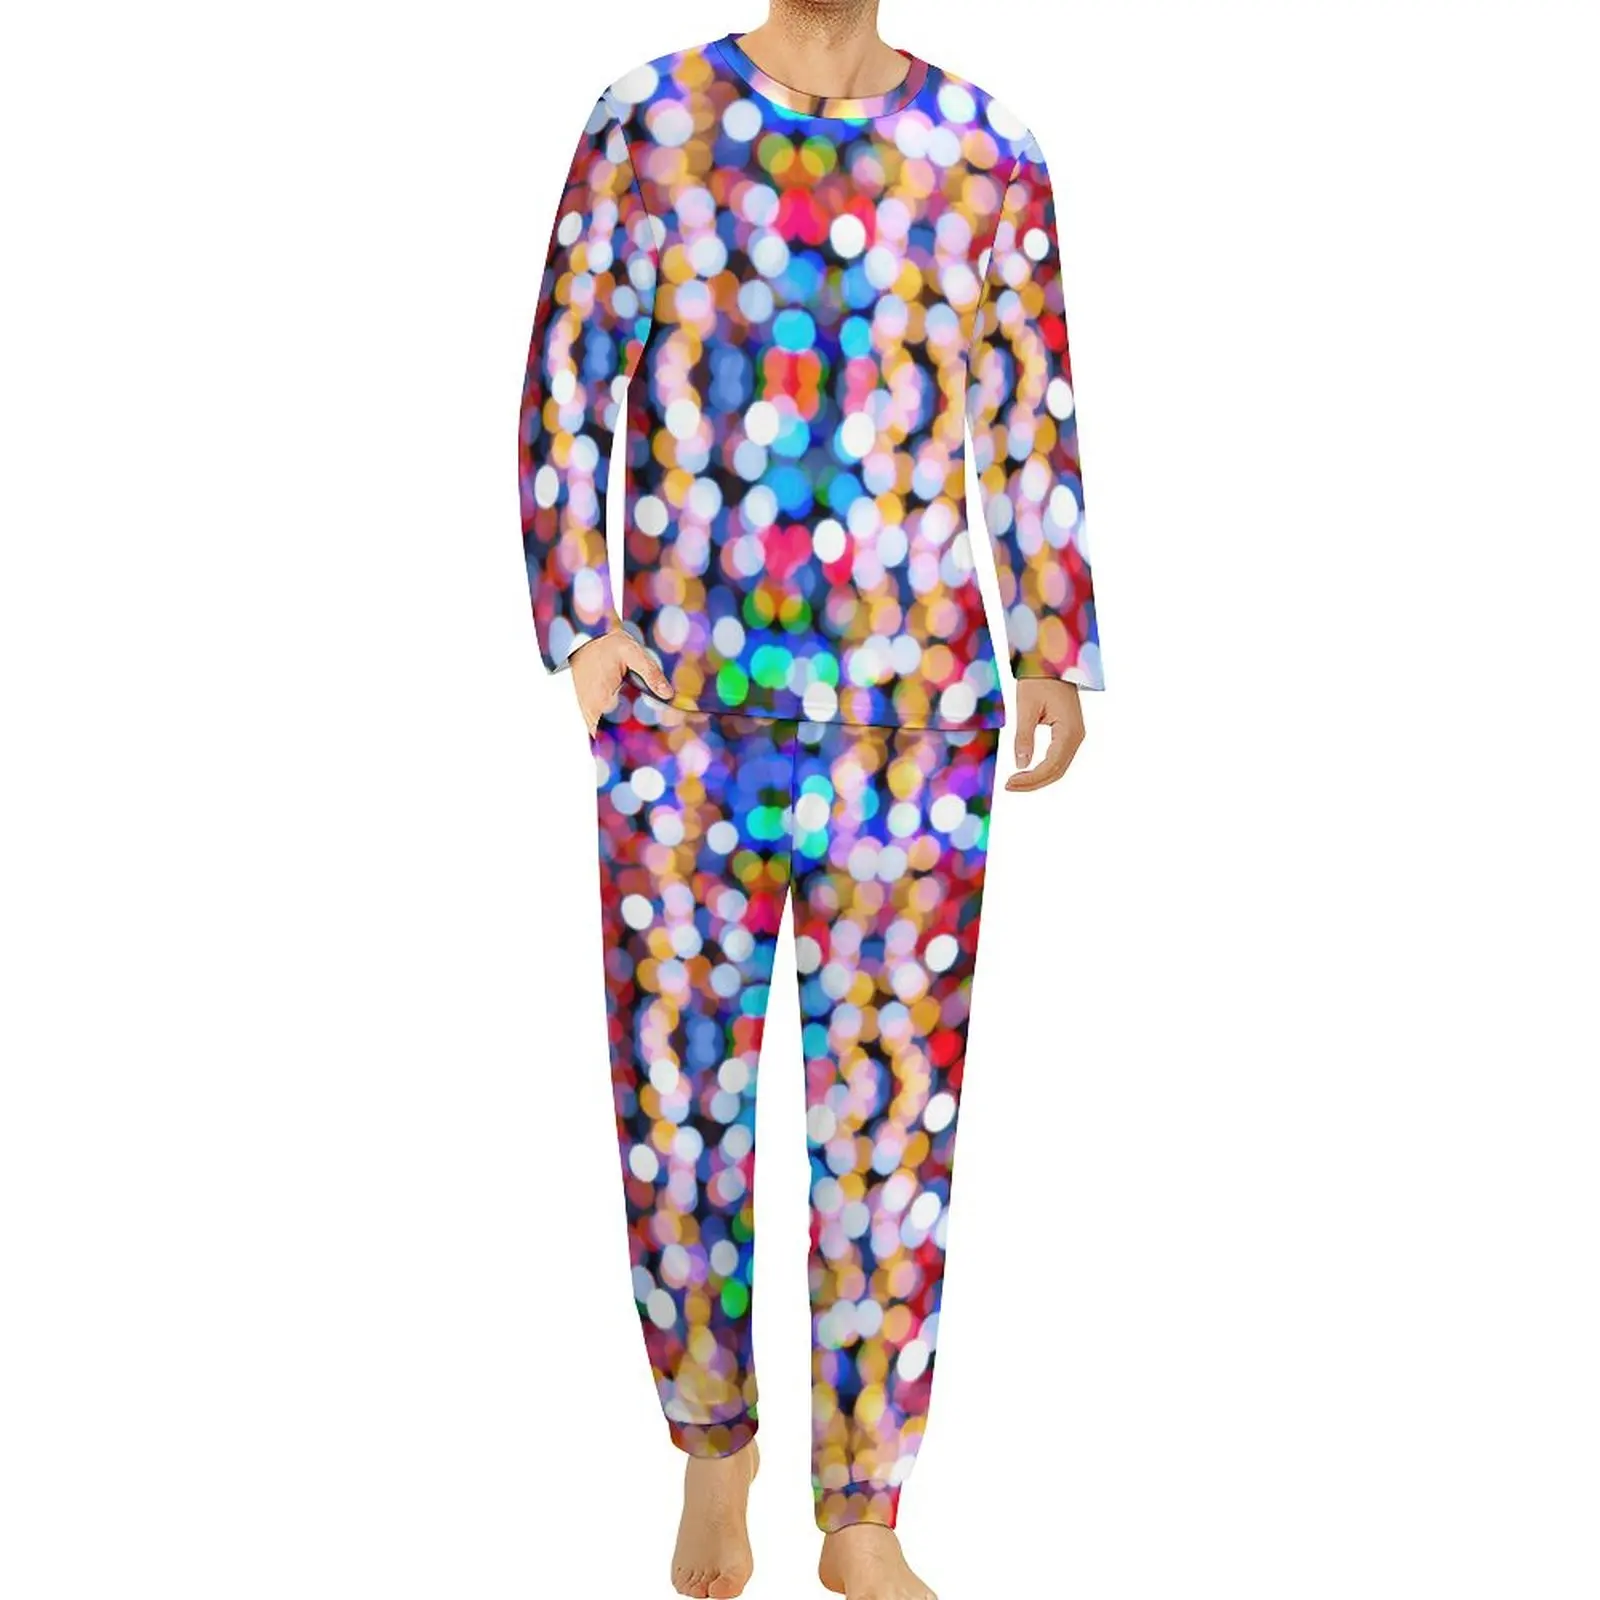 

Colorful Sparkle Print Pajamas Long-Sleeve Twinkling Lights Pattern 2 Pieces Casual Pajama Sets Winter Soft Oversized Home Suit